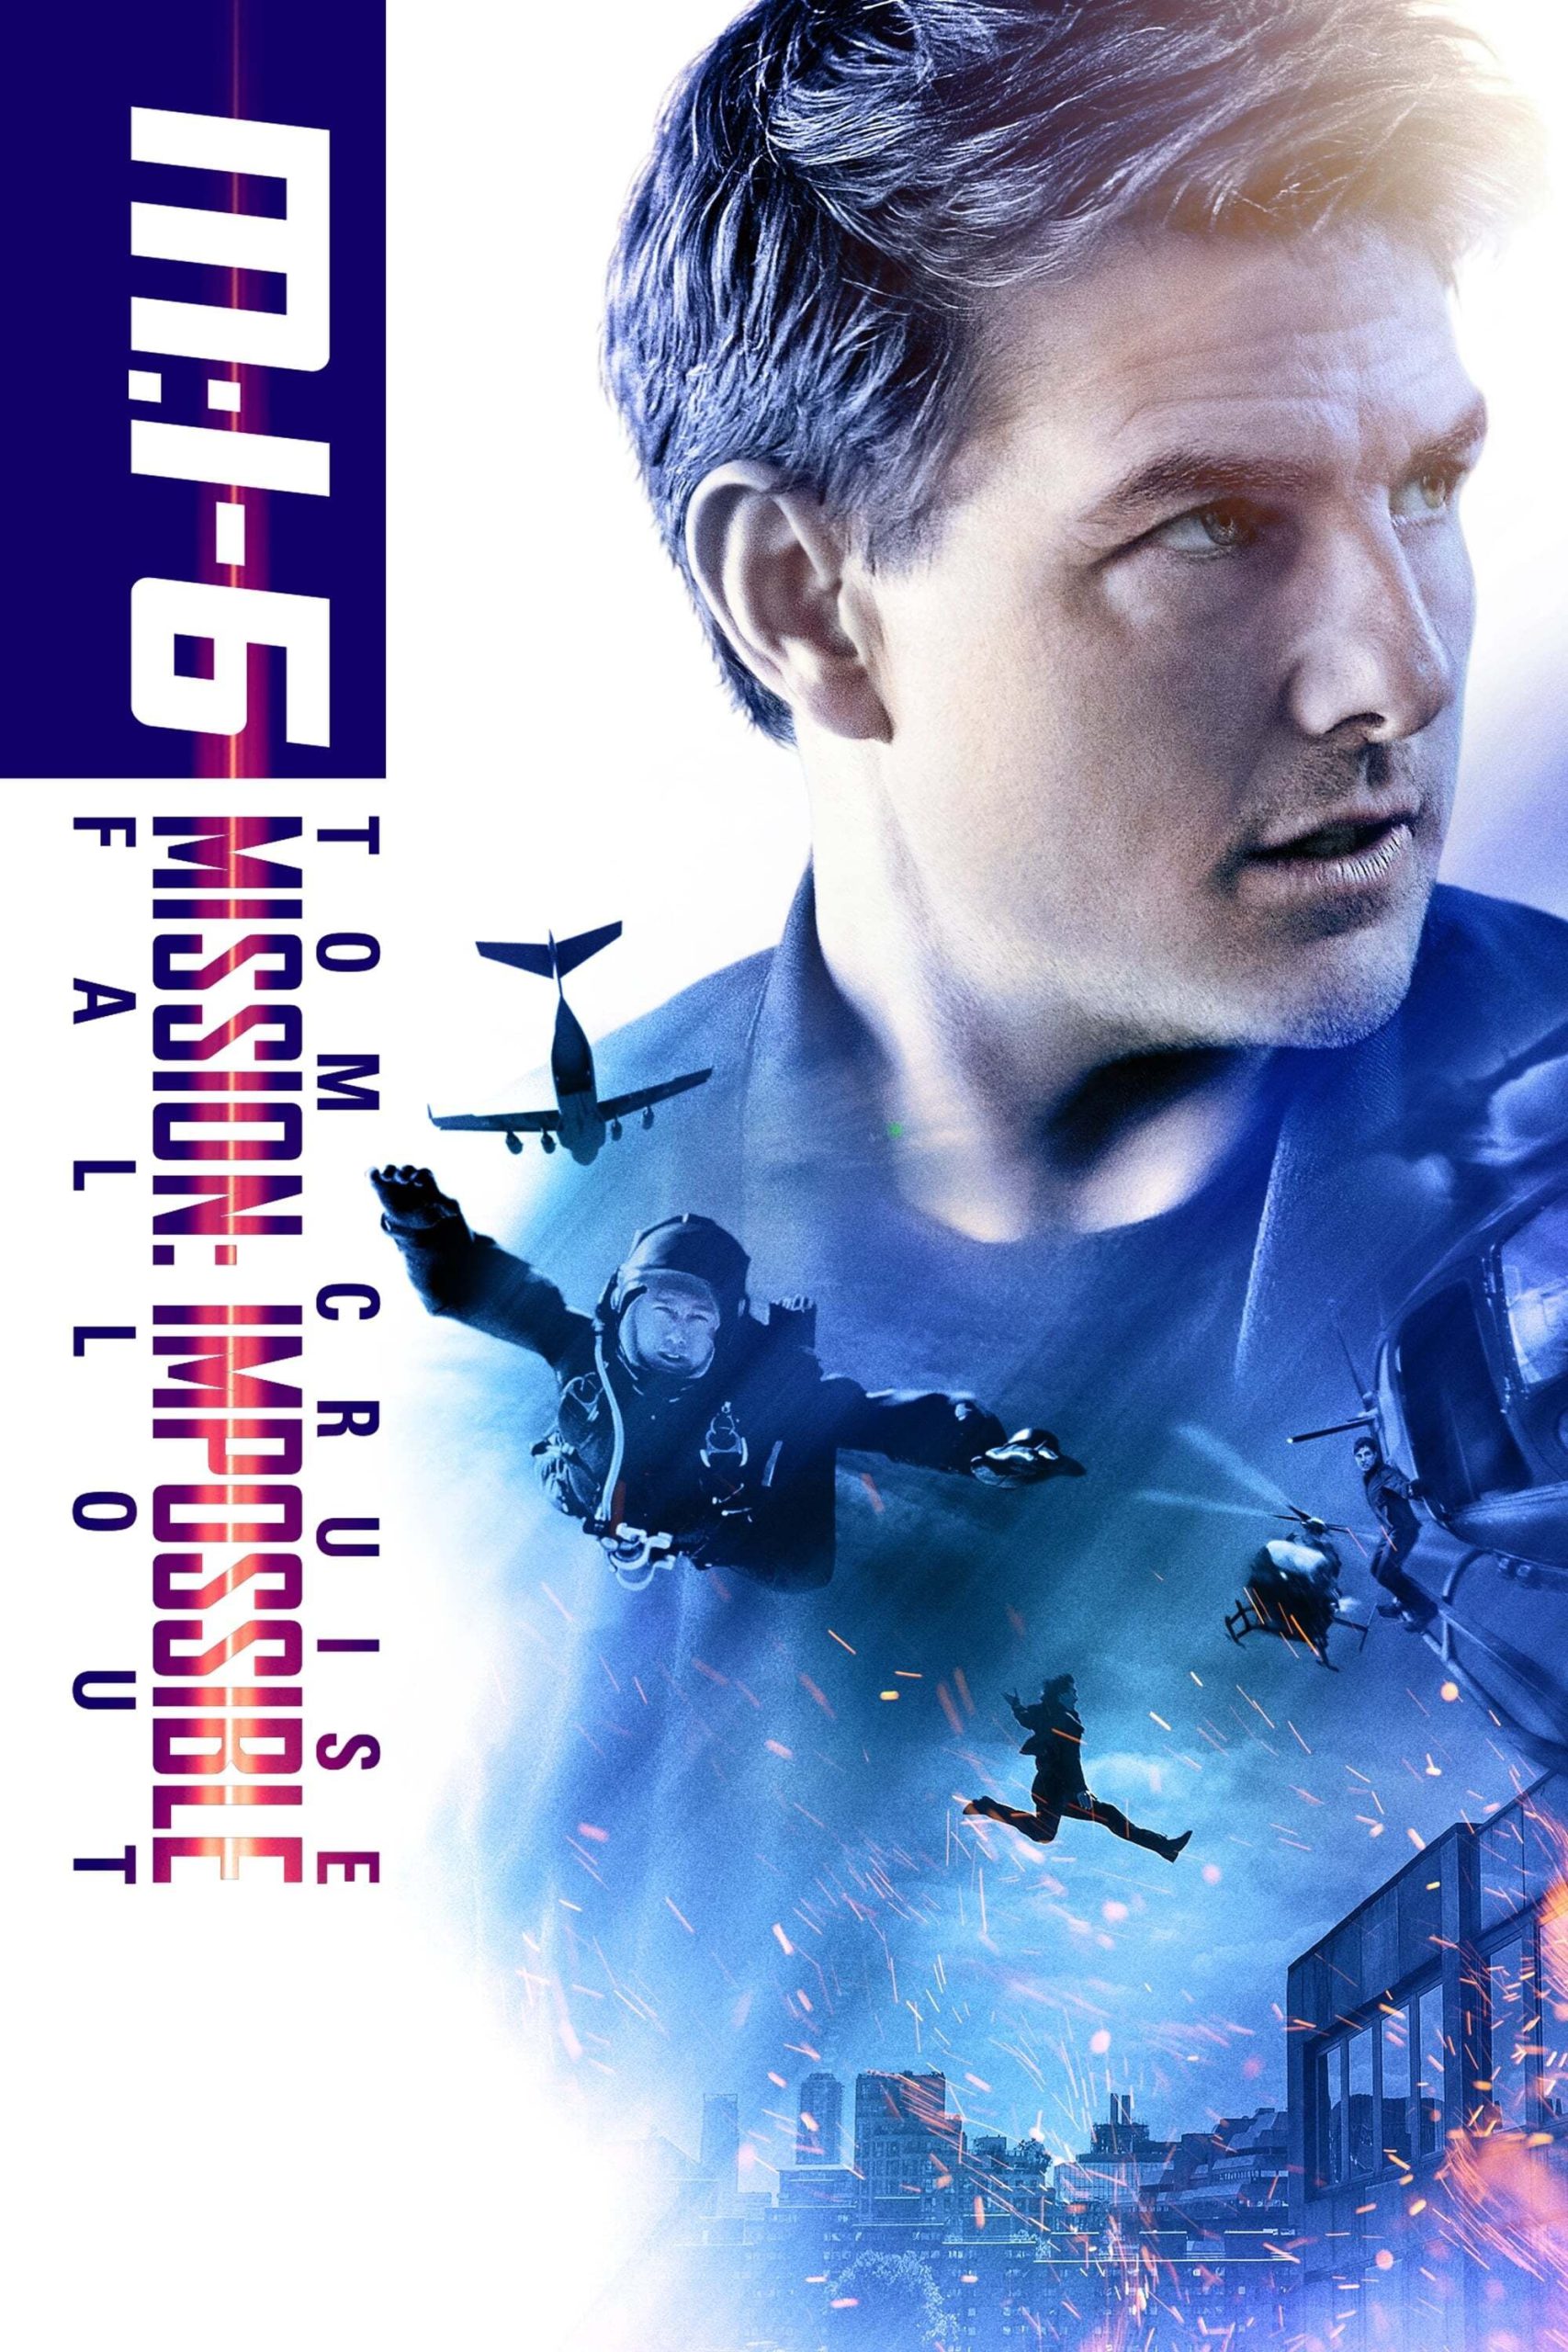 Mission Impossible – Fallout [HD/3D] (2018)